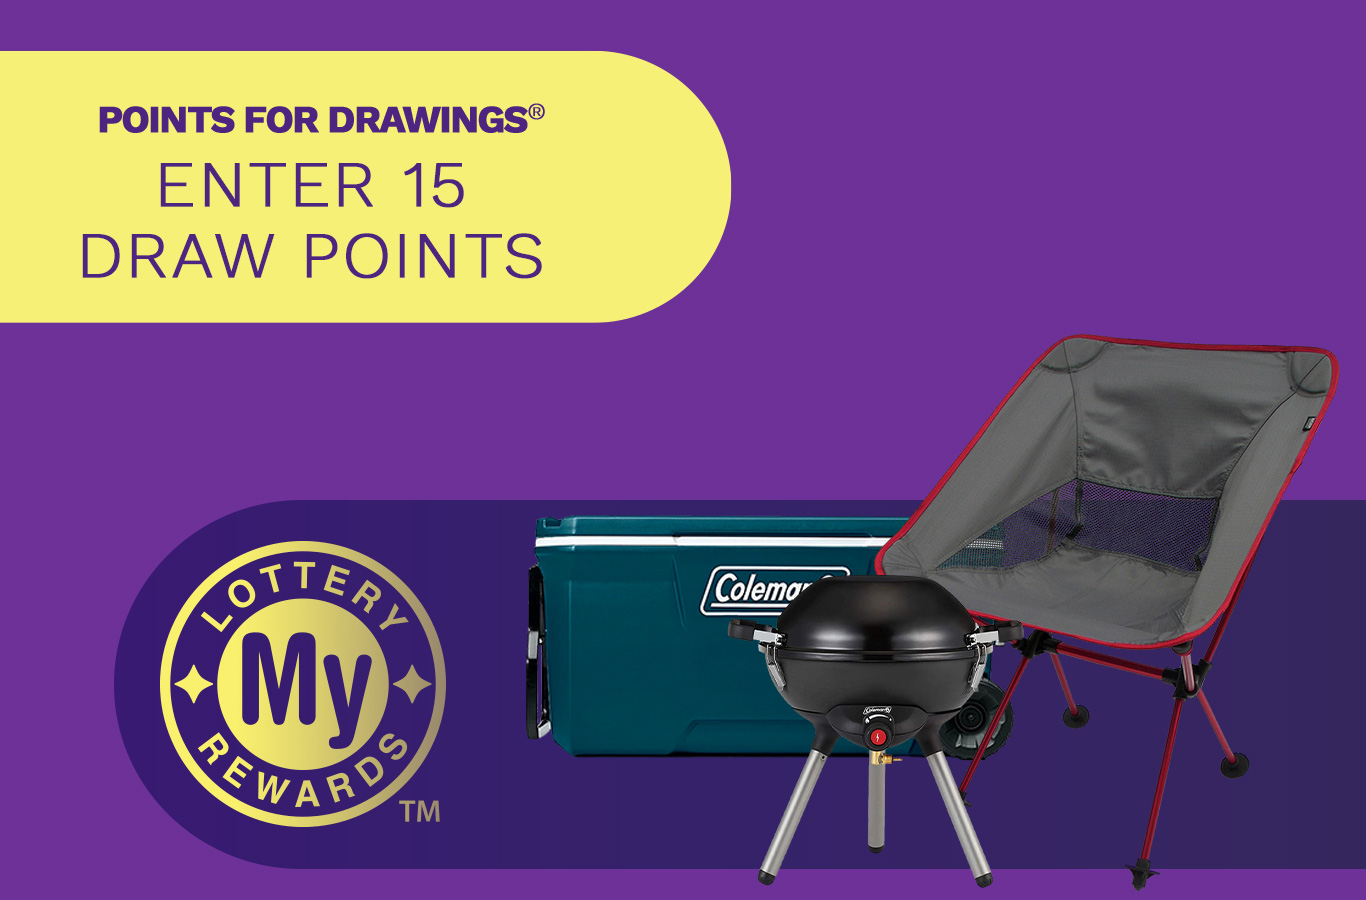 Here's your chance to win an Outdoor Package! Enter by Tuesday, July 4th.